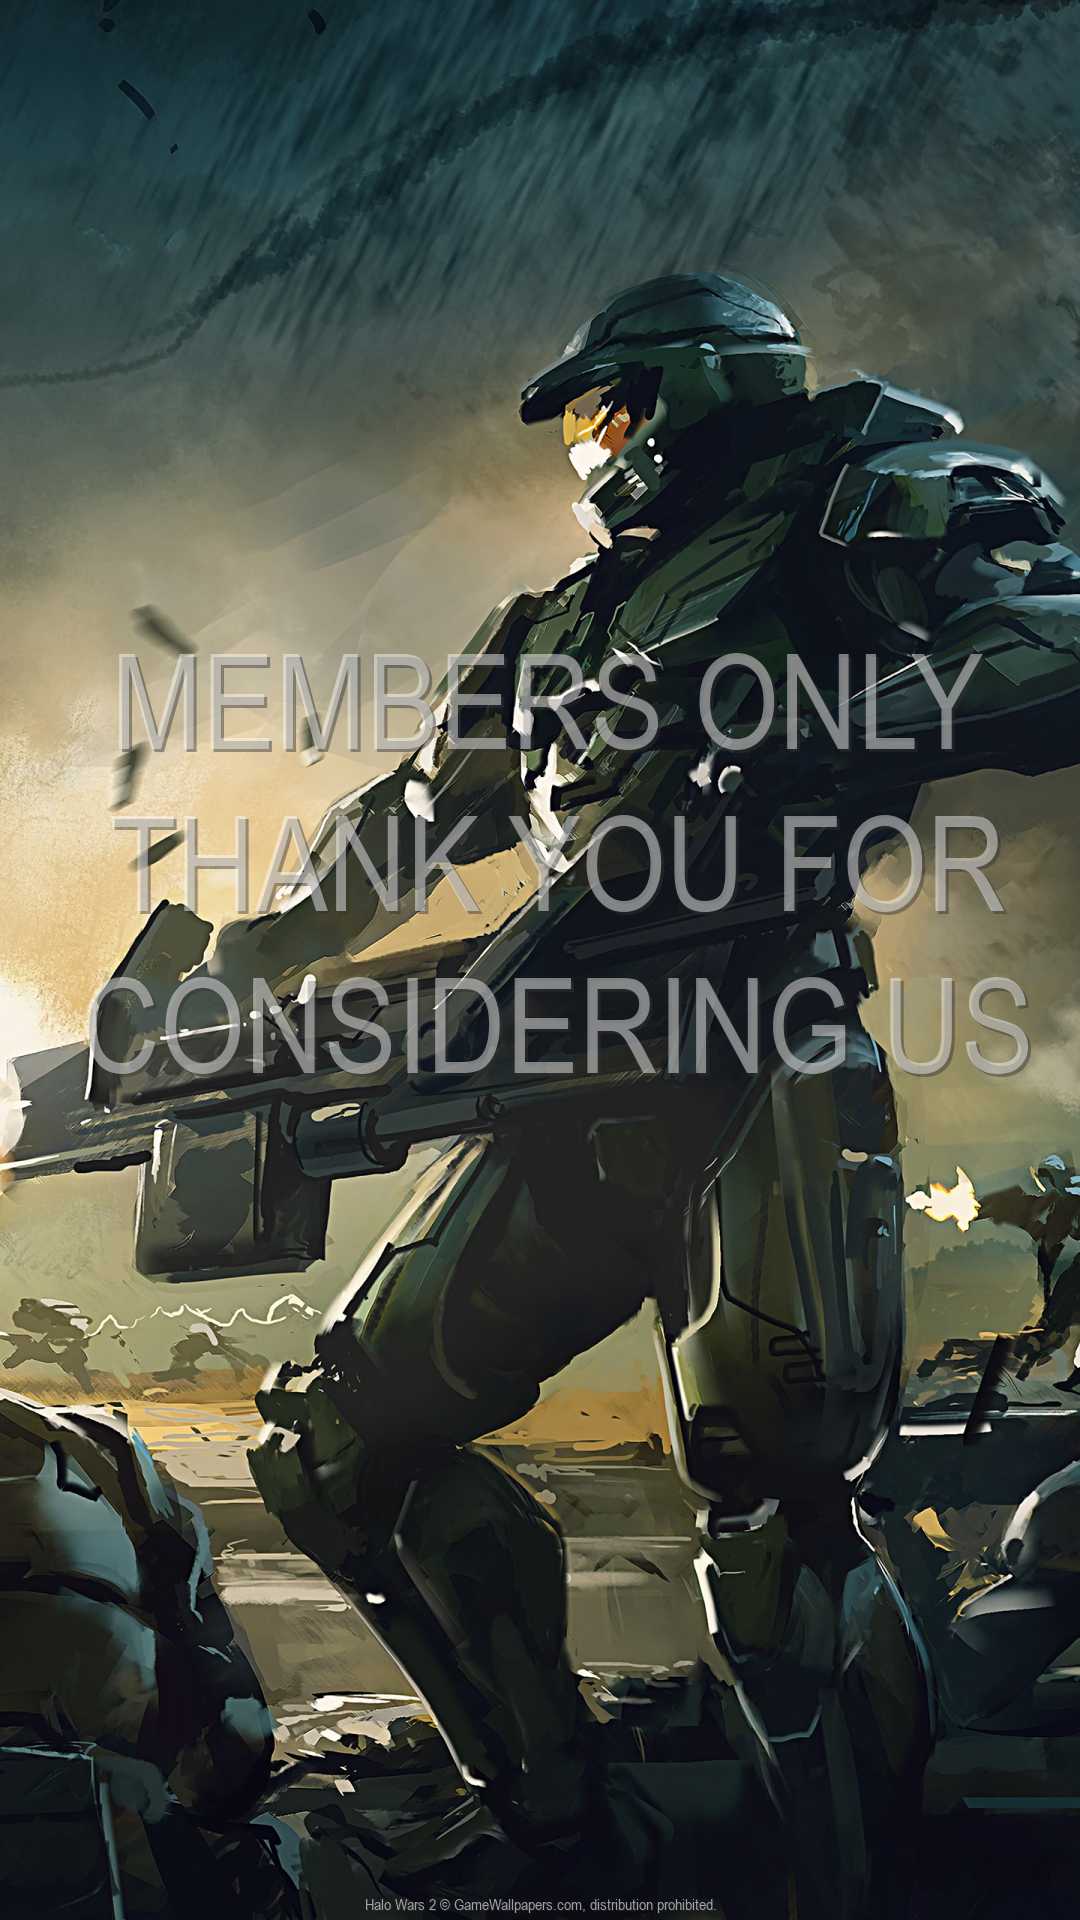 Halo Wars 2 1080p%20Vertical Mobile wallpaper or background 03